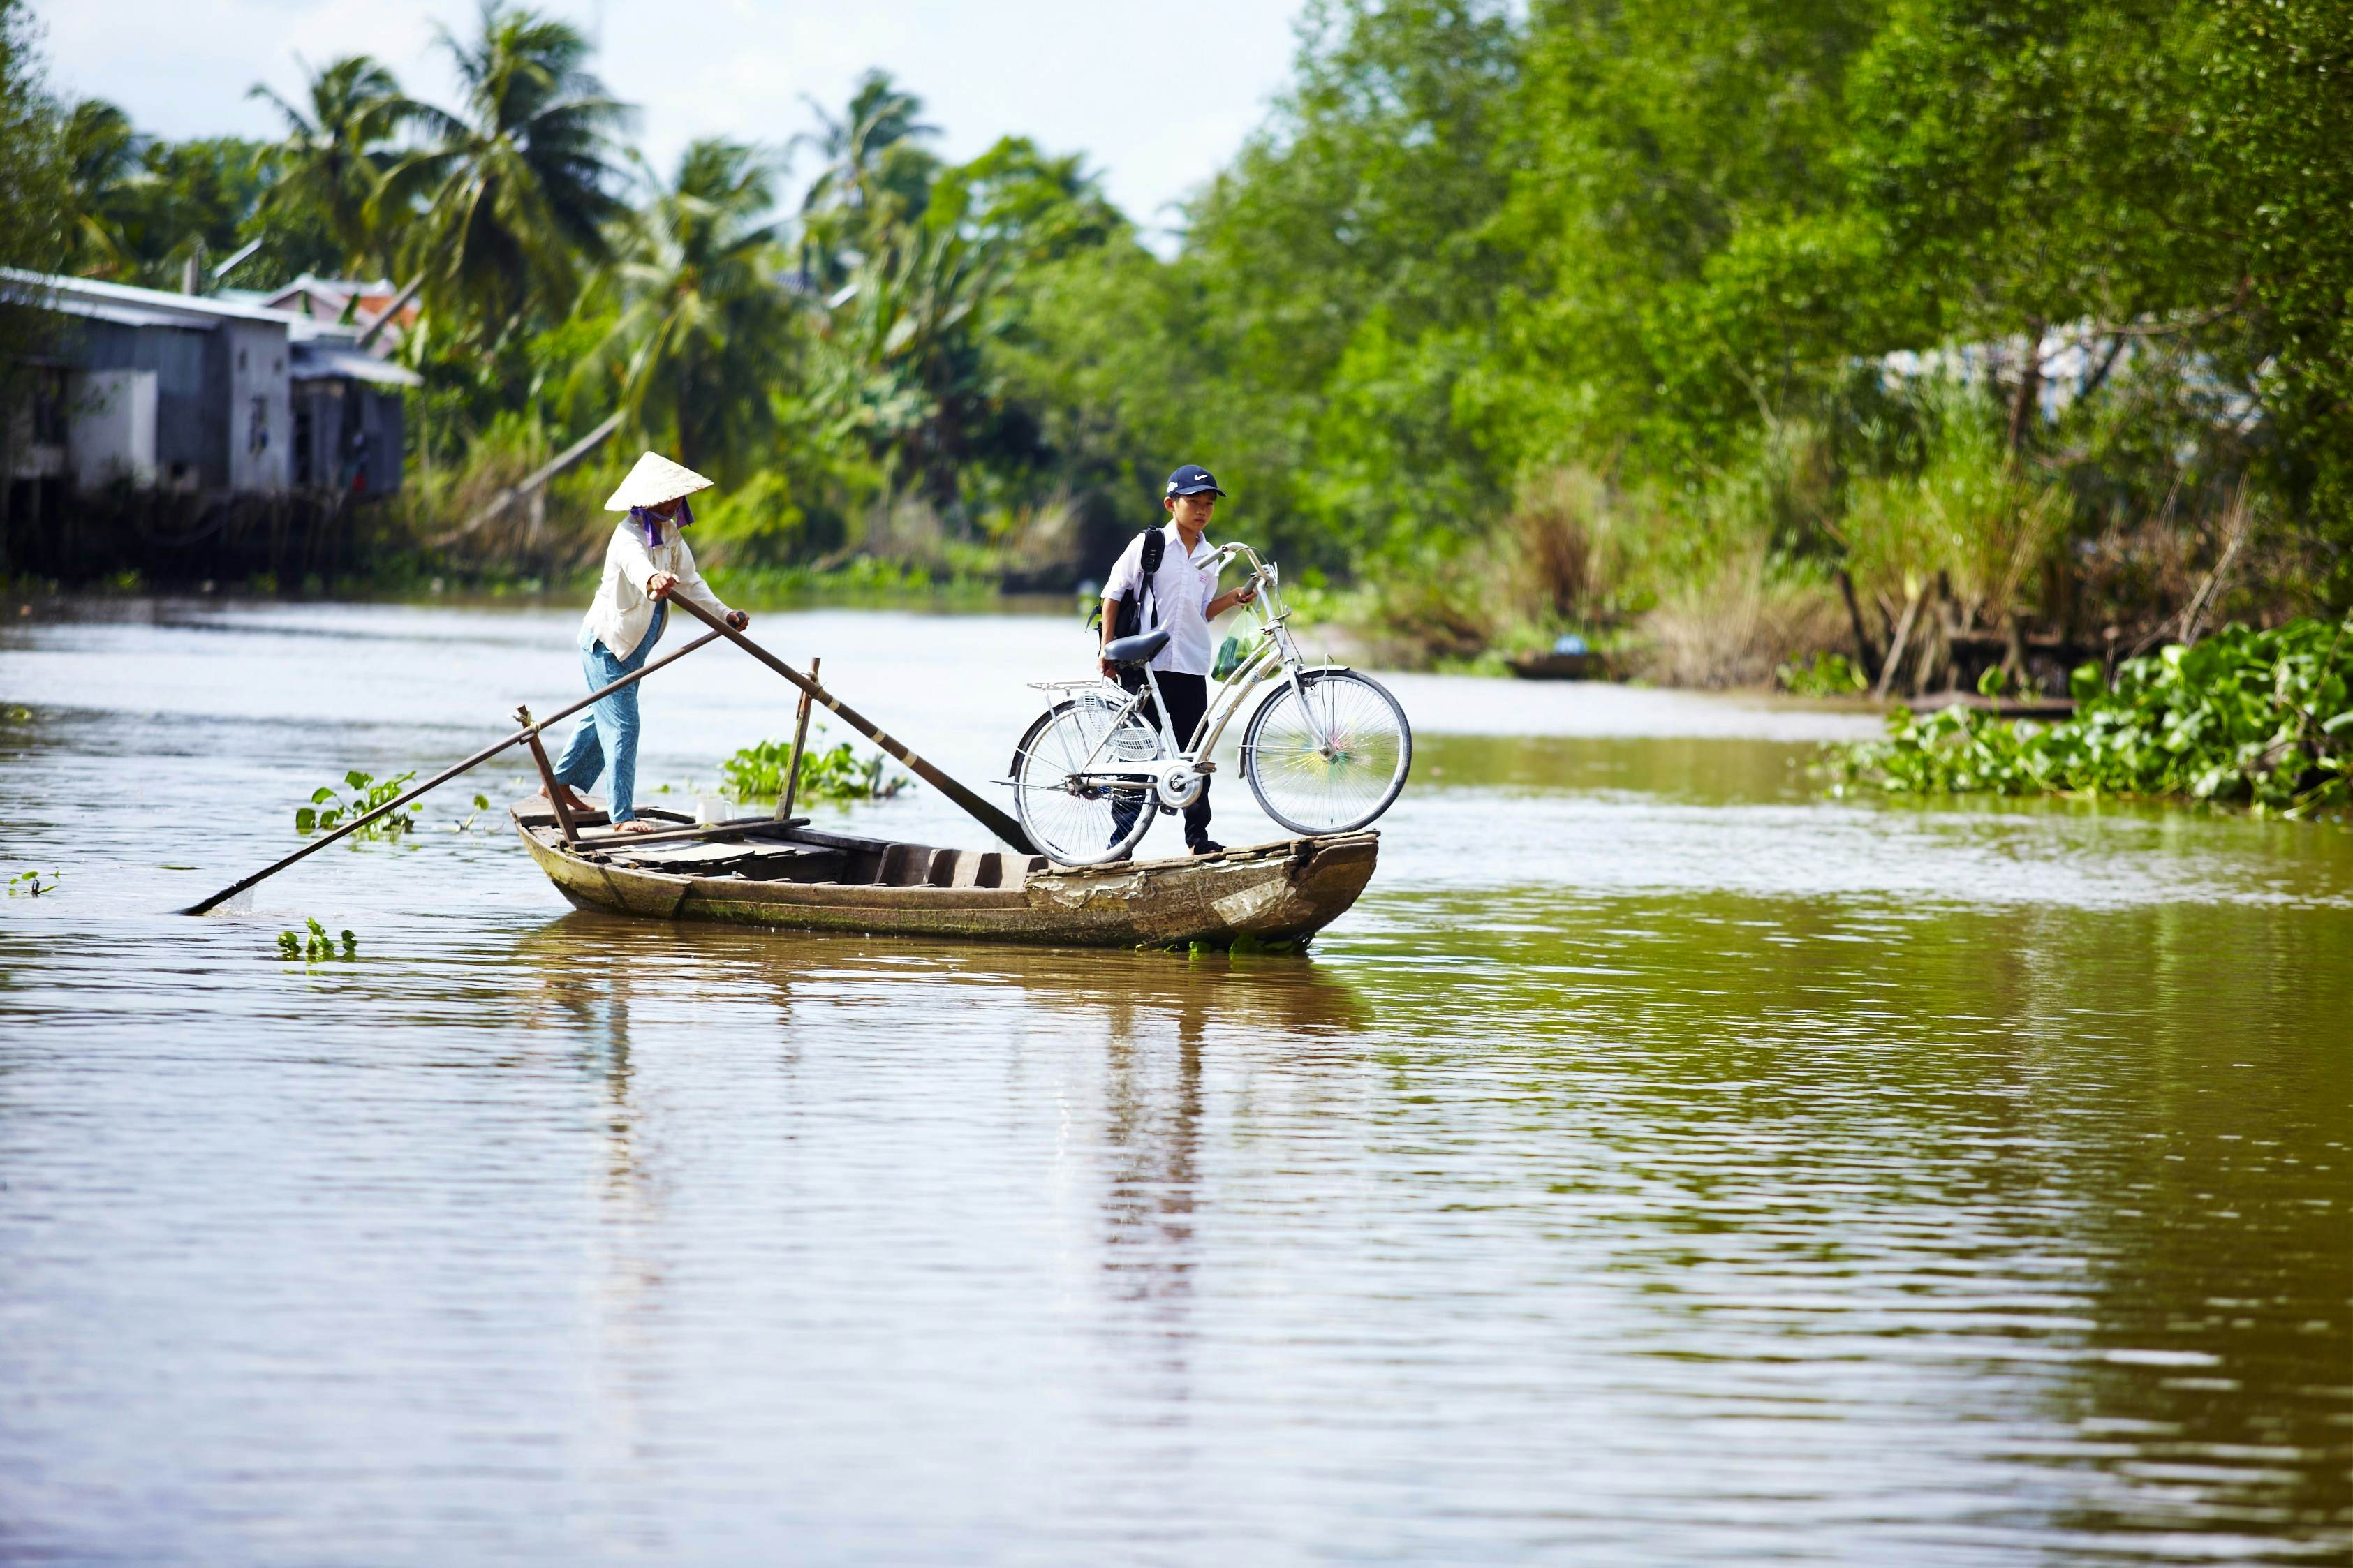 Mekong Delta travel - Lonely Planet | Vietnam, Asia